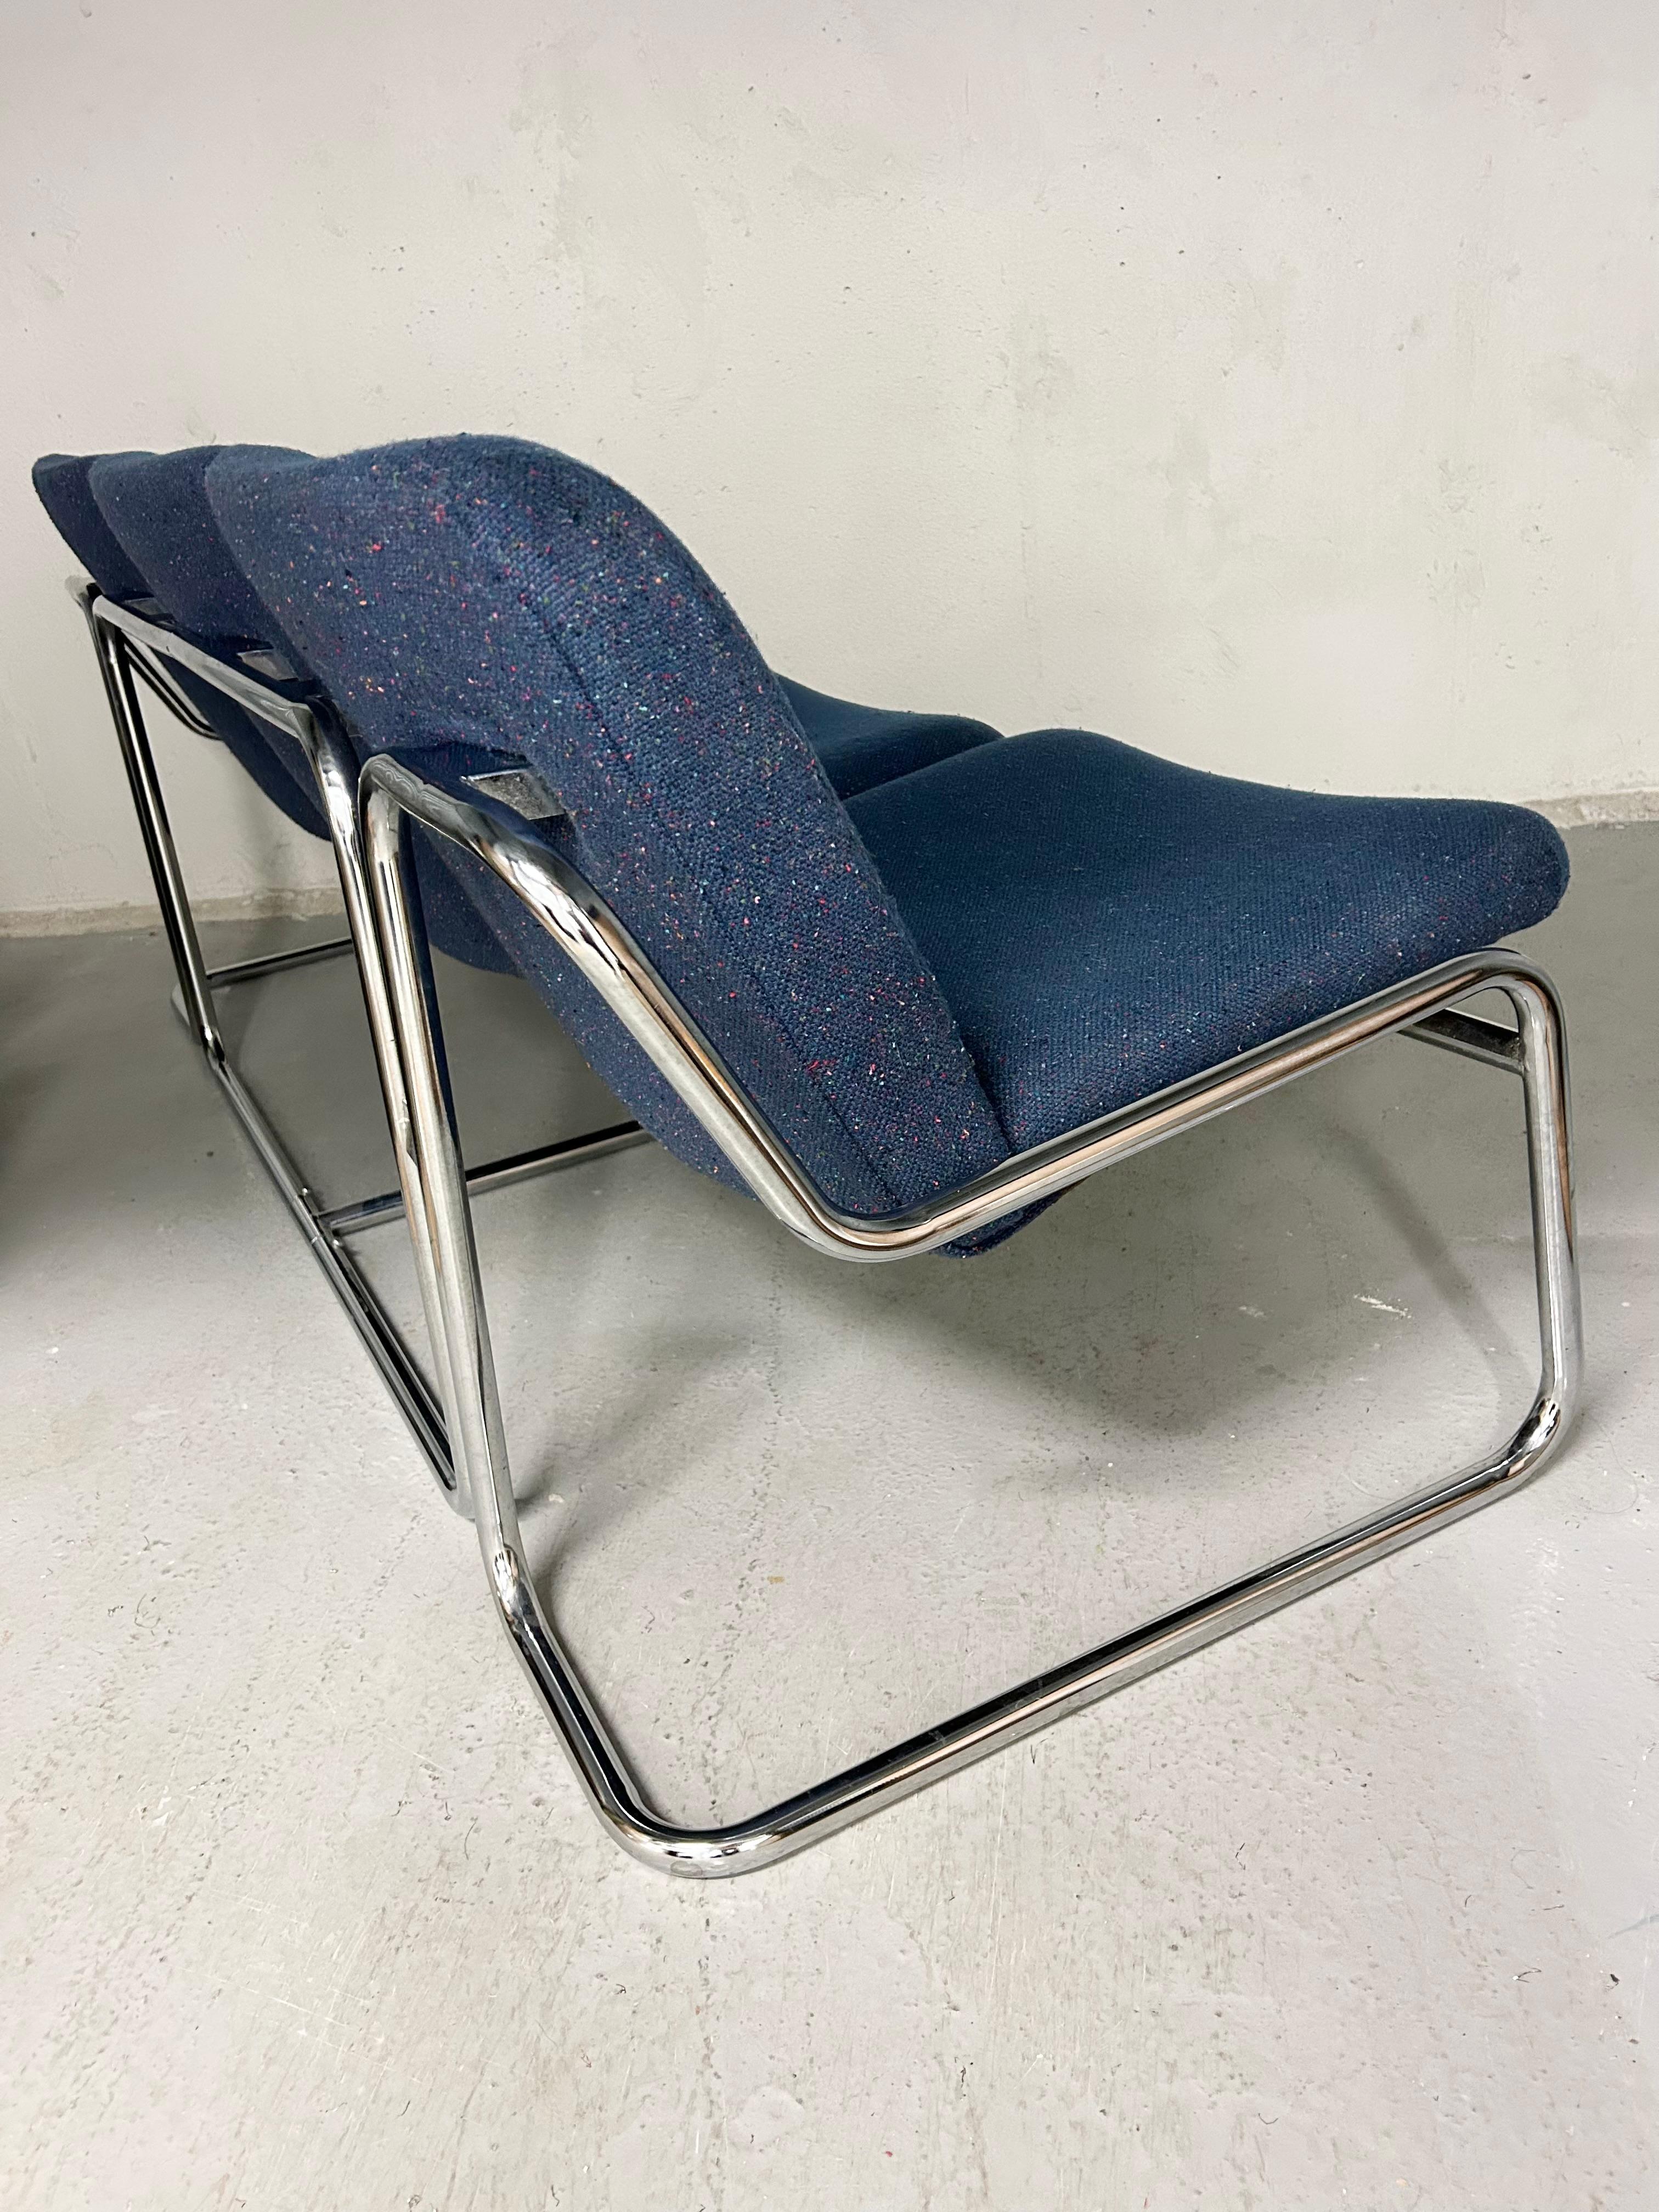 Vintage chrome sofa or bench with cushioned blue specked tweed upholstery. No manufacturer markings. Chrome has minimal wear - upholstery has normal wear. No rips, tears, or major stains. Has light subtle spots but minimal. 